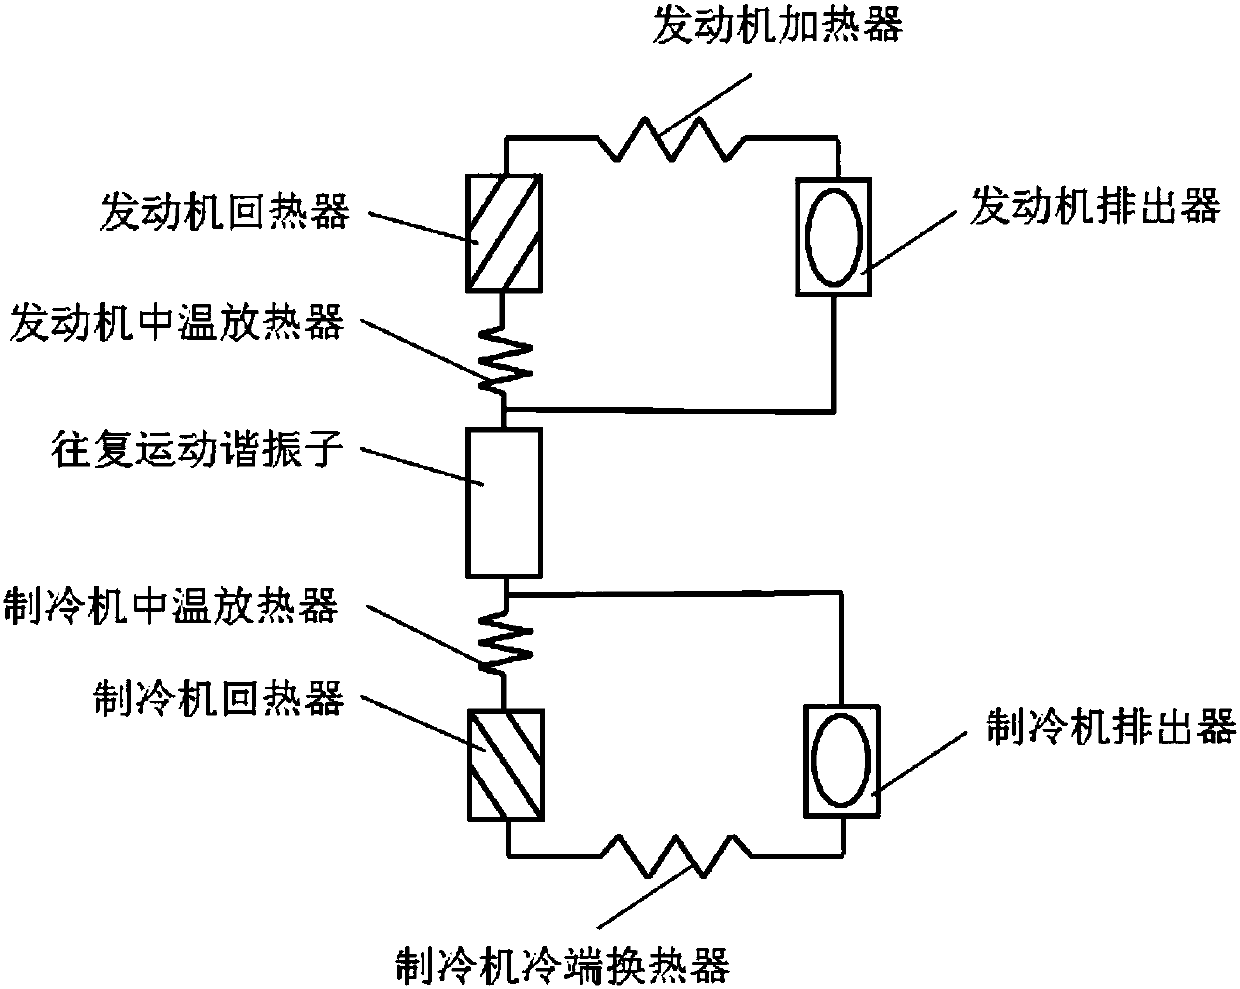 Double-effect free-piston Stirling thermal driving refrigerator/heat pump system